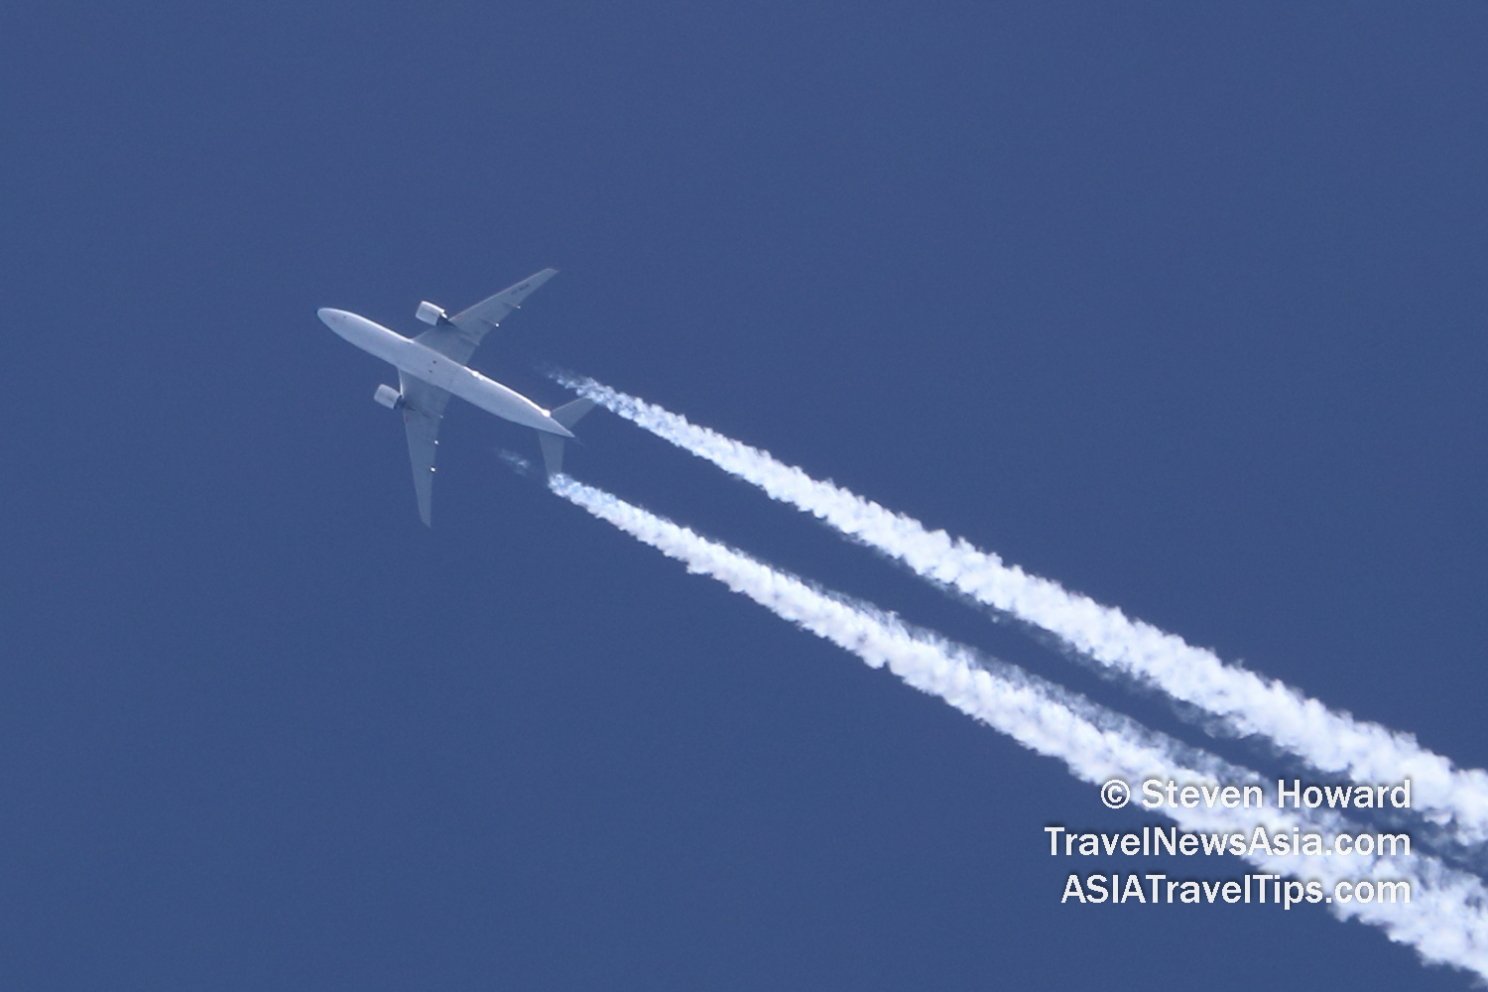 Aircraft leaves contrails behind as it flies overhead. Picture by Steven Howard of TravelNewsAsia.com Click to enlarge.